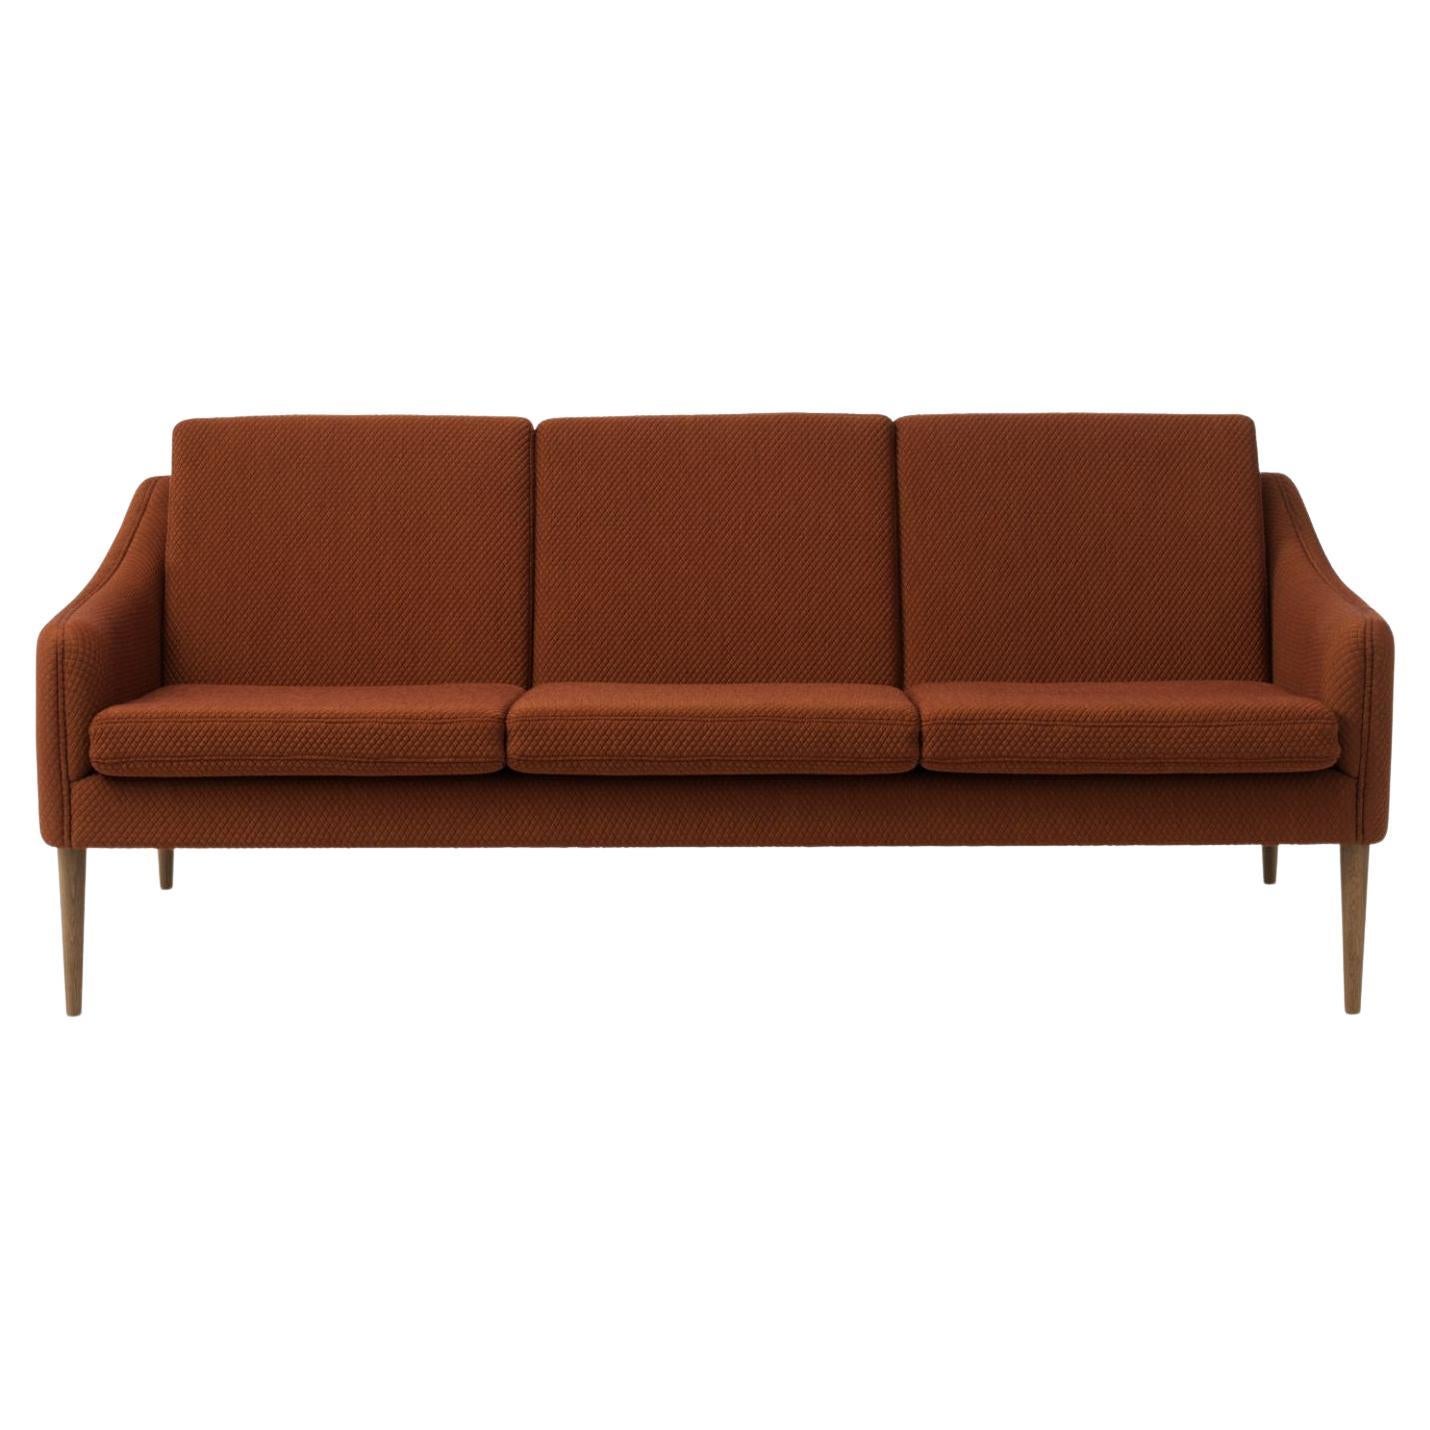 Mr Olsen 3 Seater Oak Mosaic Spicy Brown by Warm Nordic For Sale